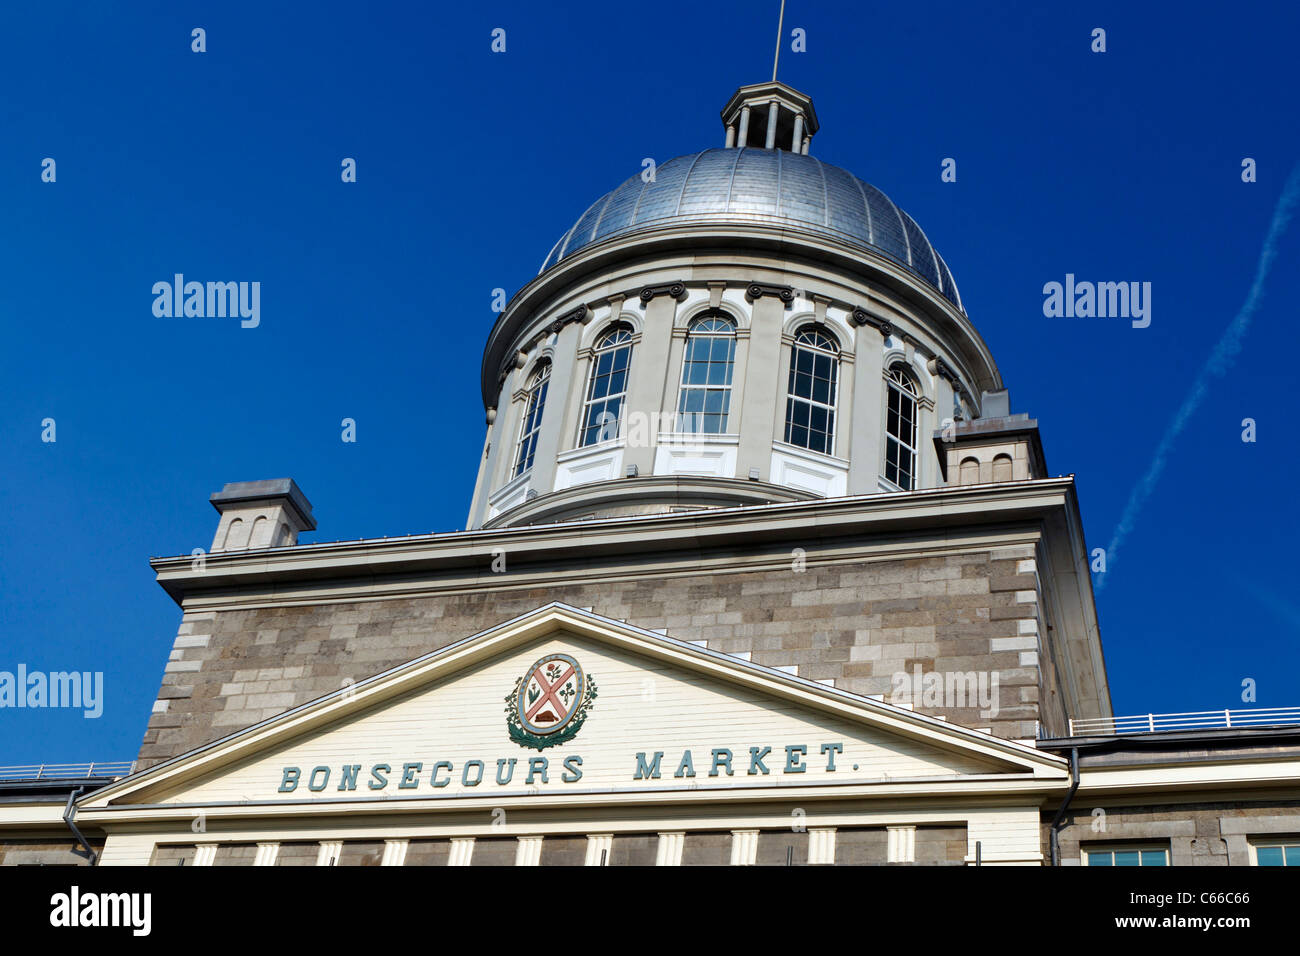 Detailed view of the front and silver dome of the Bonsecours Market / Marche Bonsecours, Old Montreal, Montreal, Quebec, Canada Stock Photo